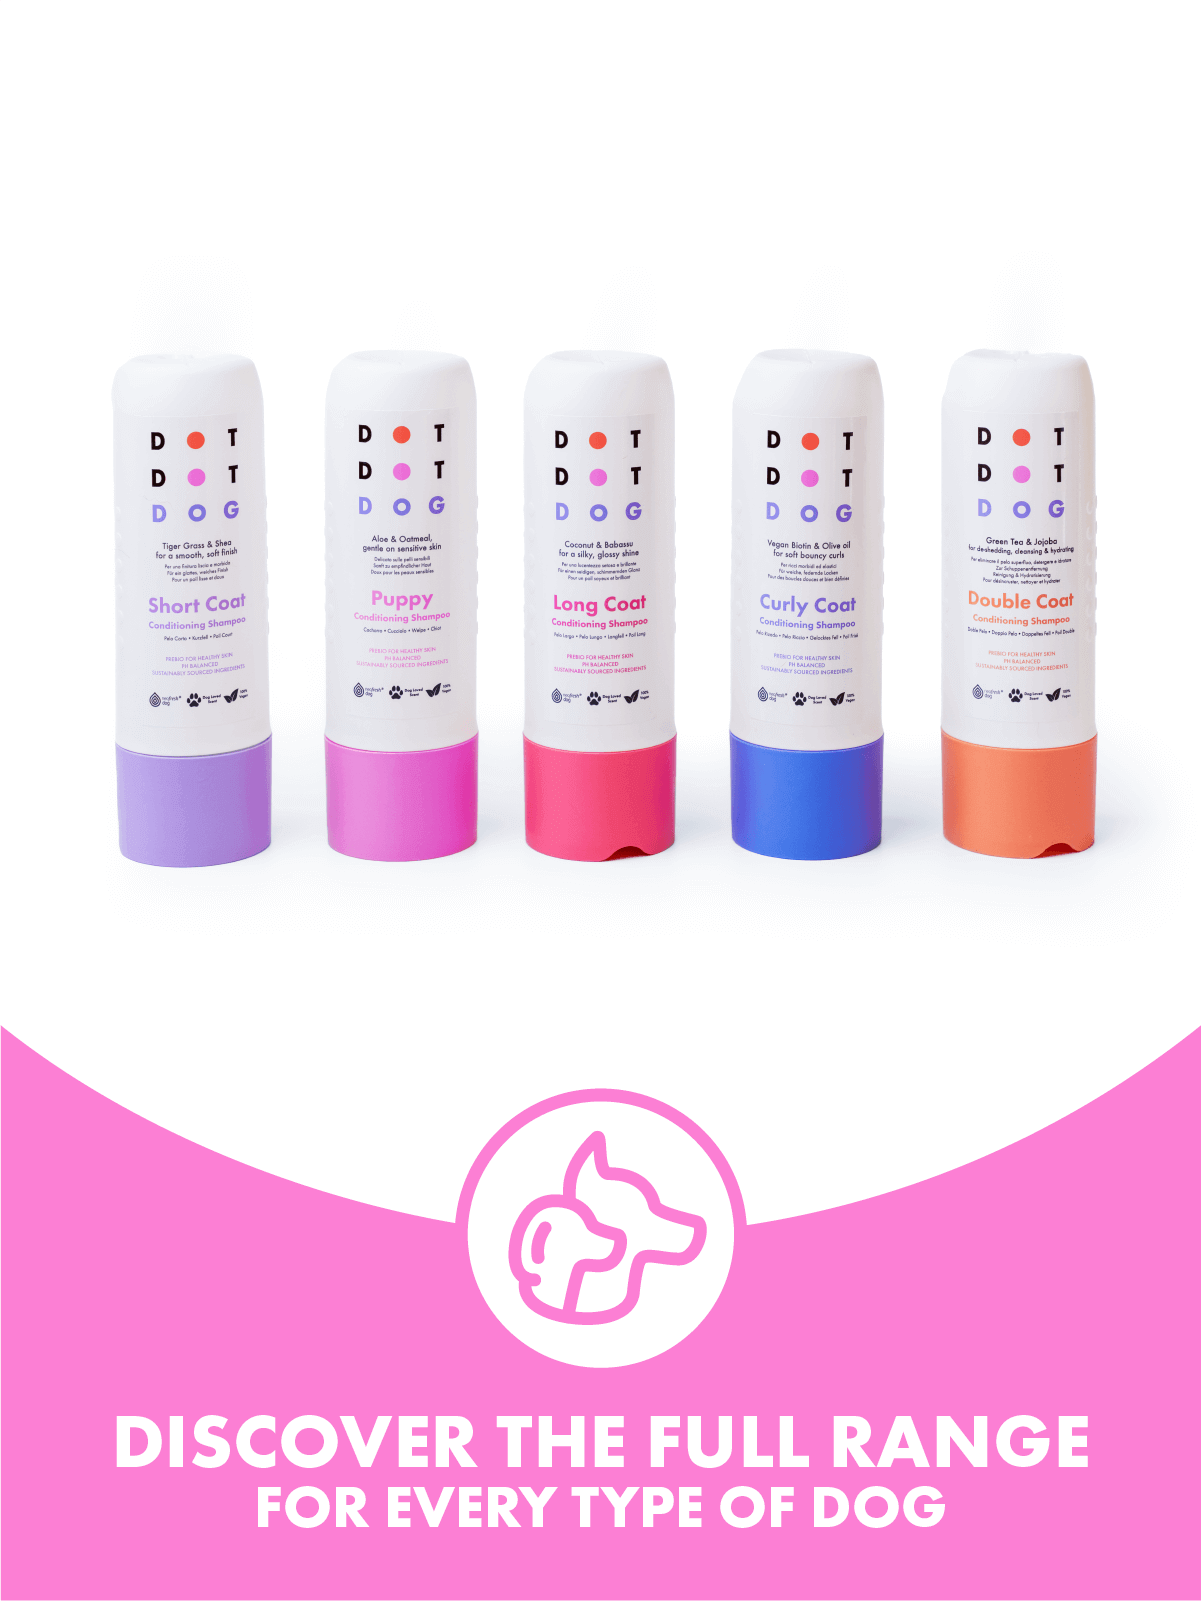 DotDotPet's shampoo range with prebiotic for healthy skin, vegan no nasties formulation, dog loved fragrance for calm bath time, neofresh technology for smelly dogs